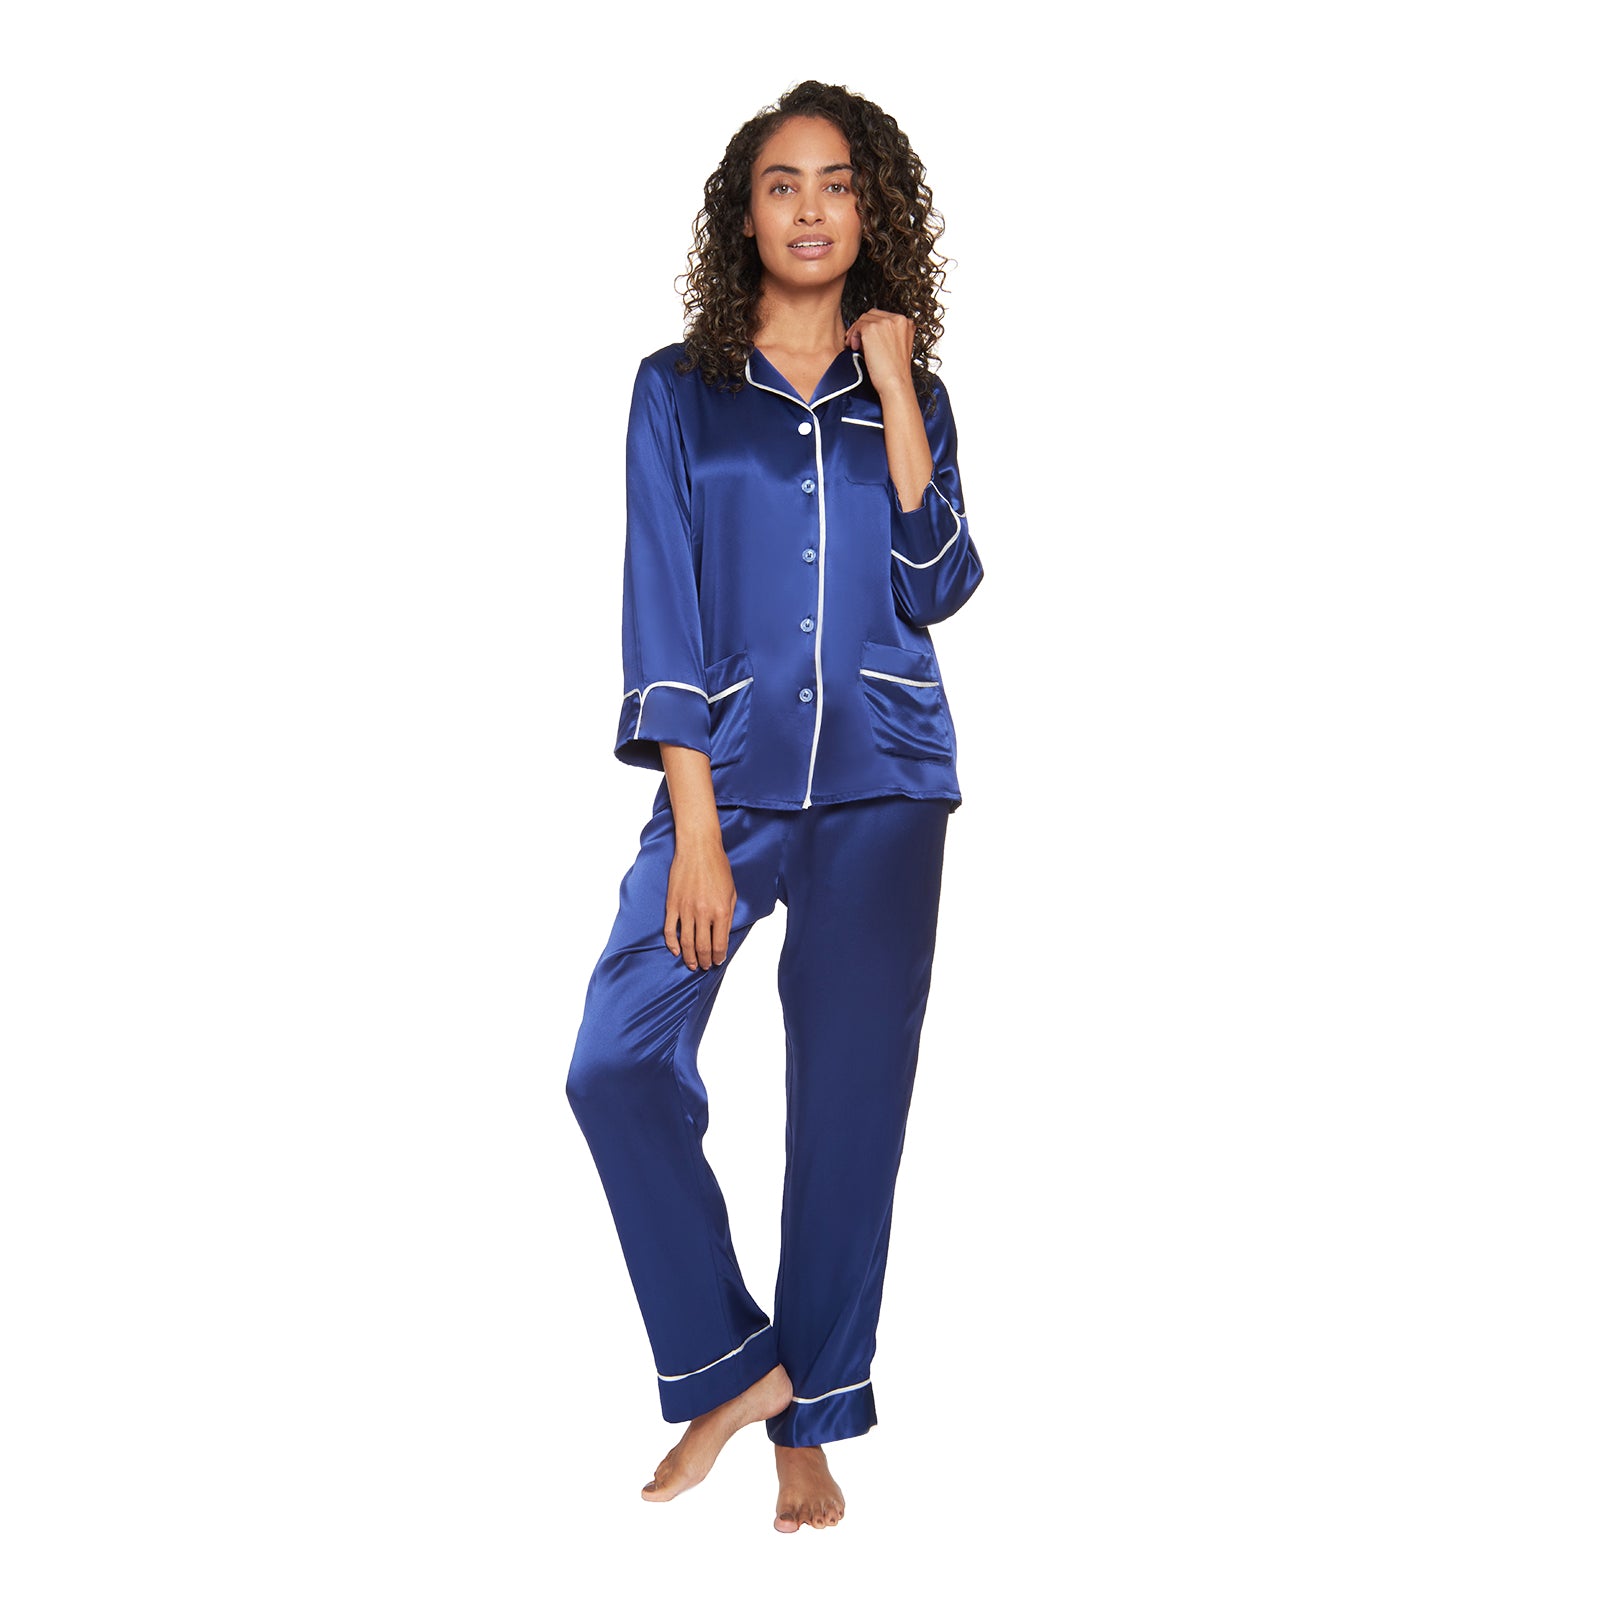 MYK Silk Women's Pajama Set With Contrast Piping, 44% OFF